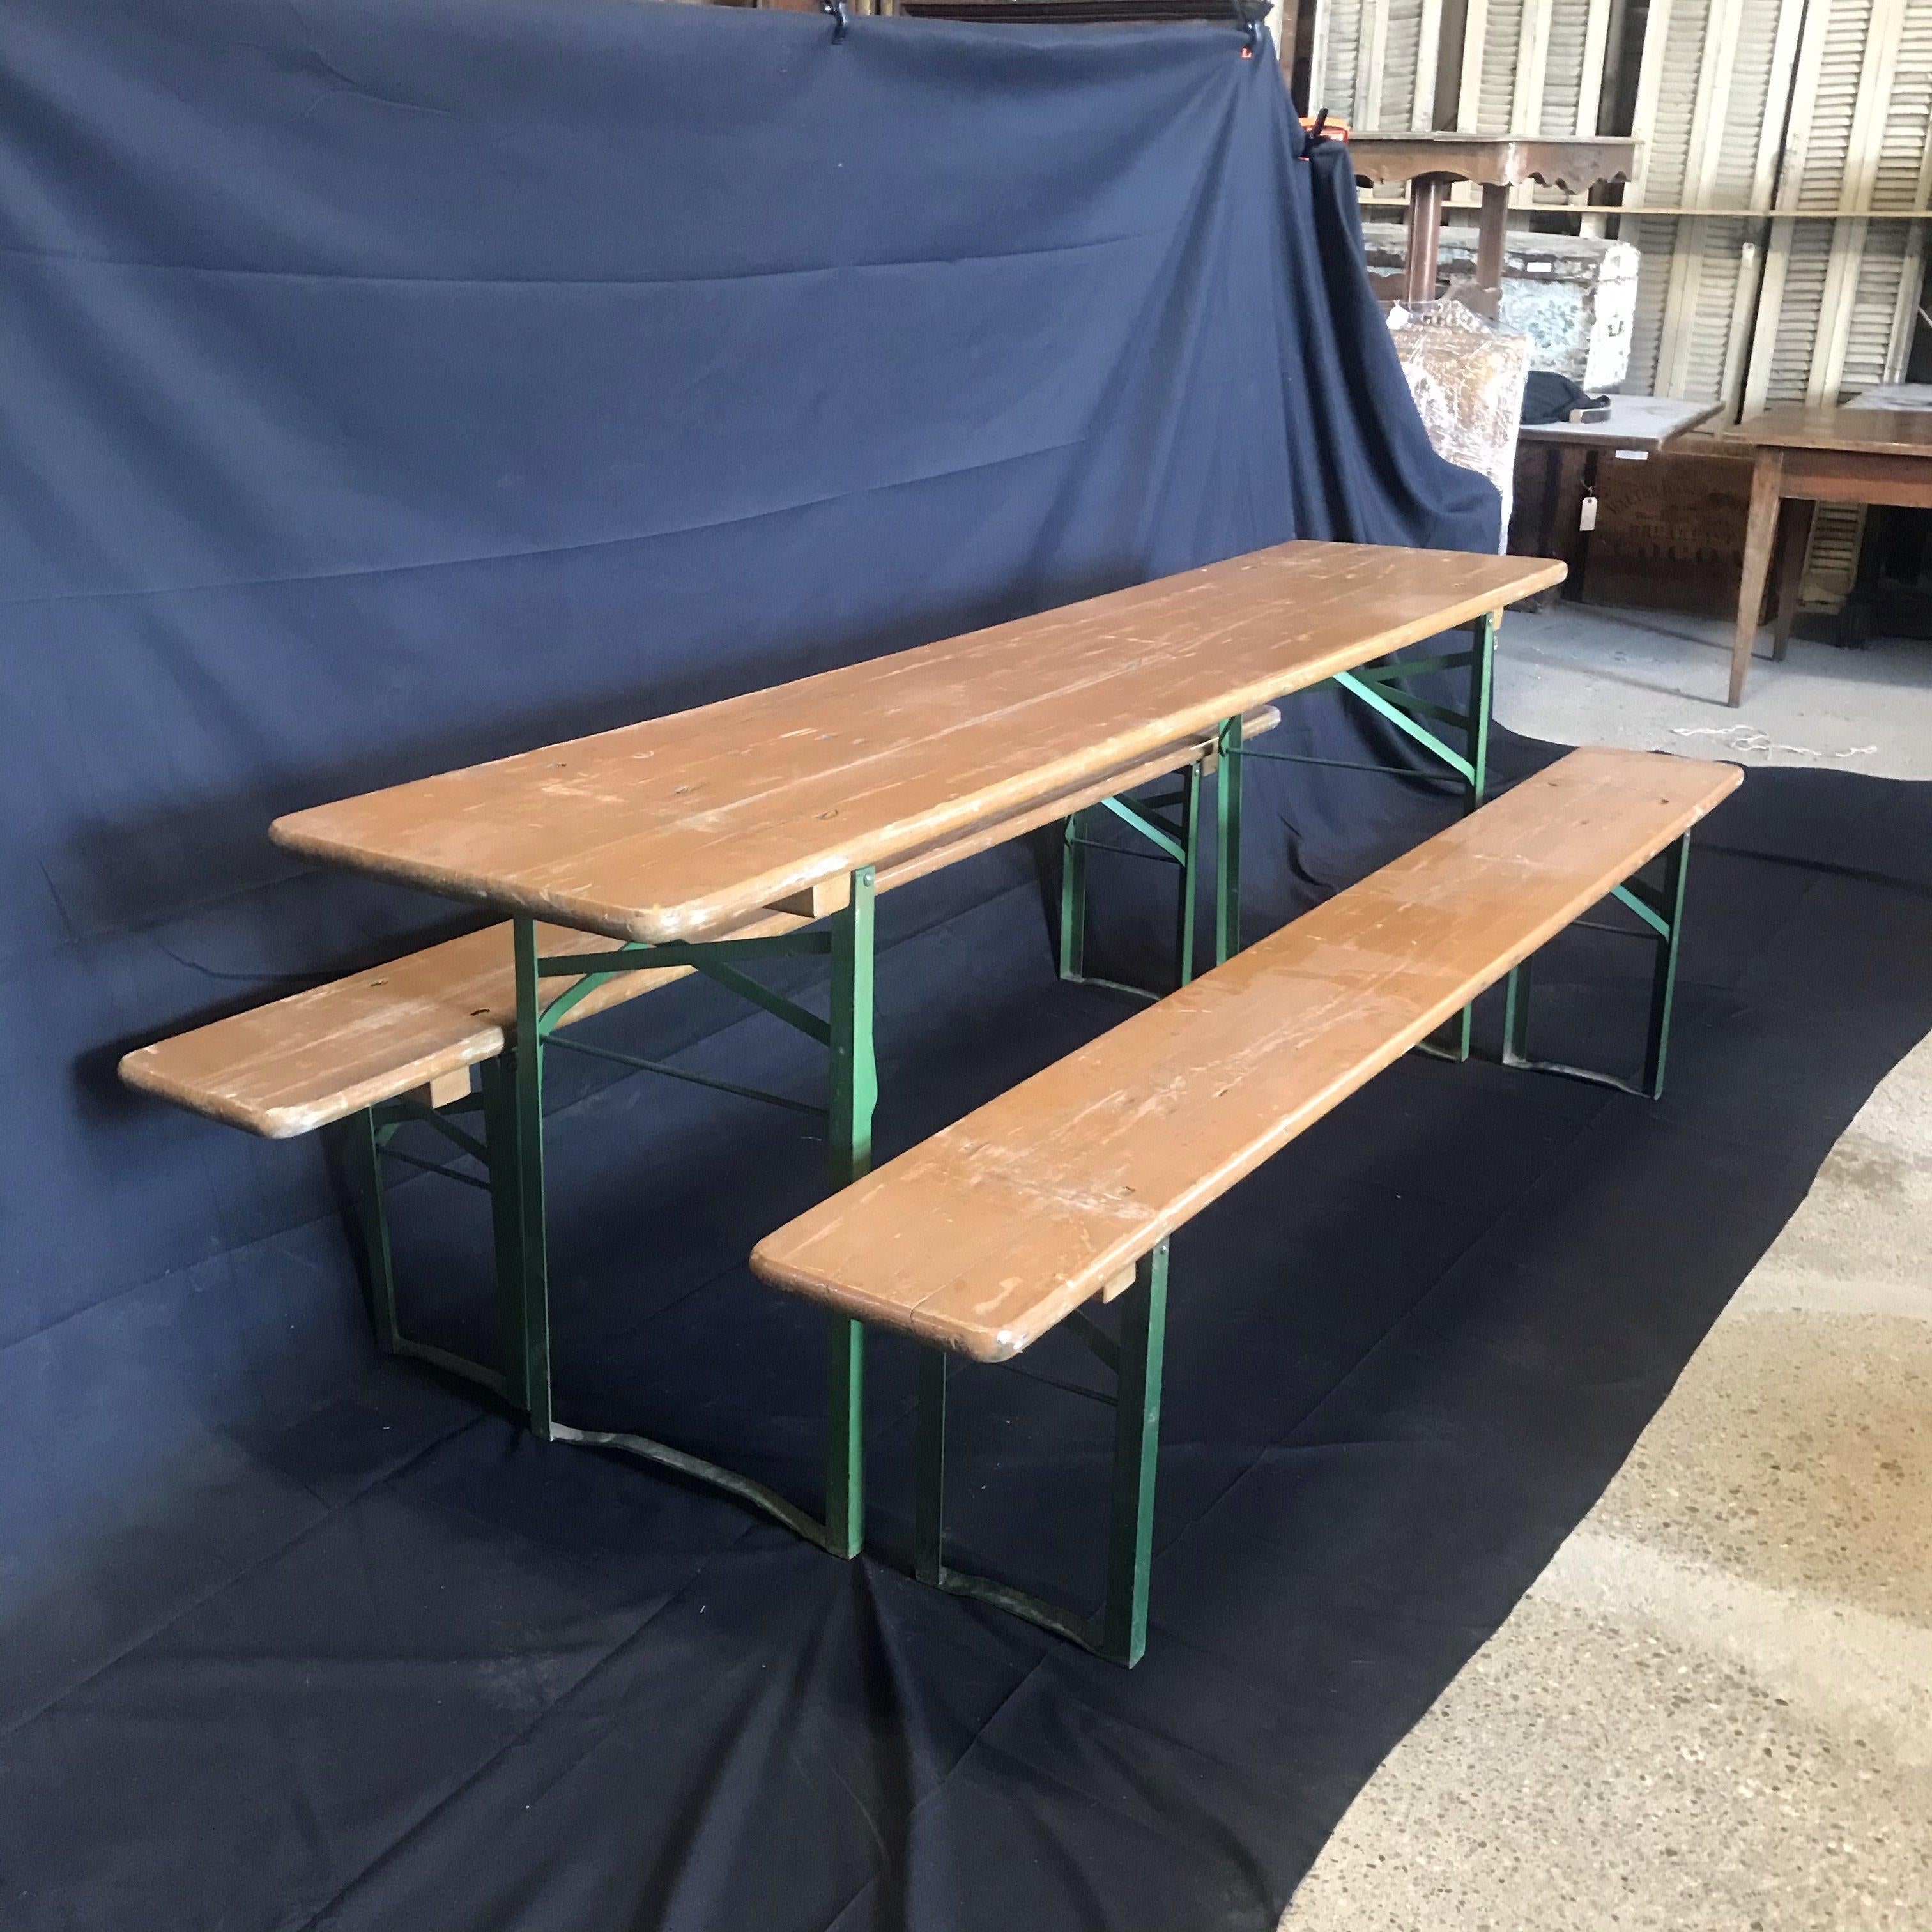 Vintage collapsible German beer garden table and bench set, consisting of a folding table and two folding benches in vintage paint. Great size and color, very sturdy, shows sign of use and wear with character rich patina. Structurally sound,